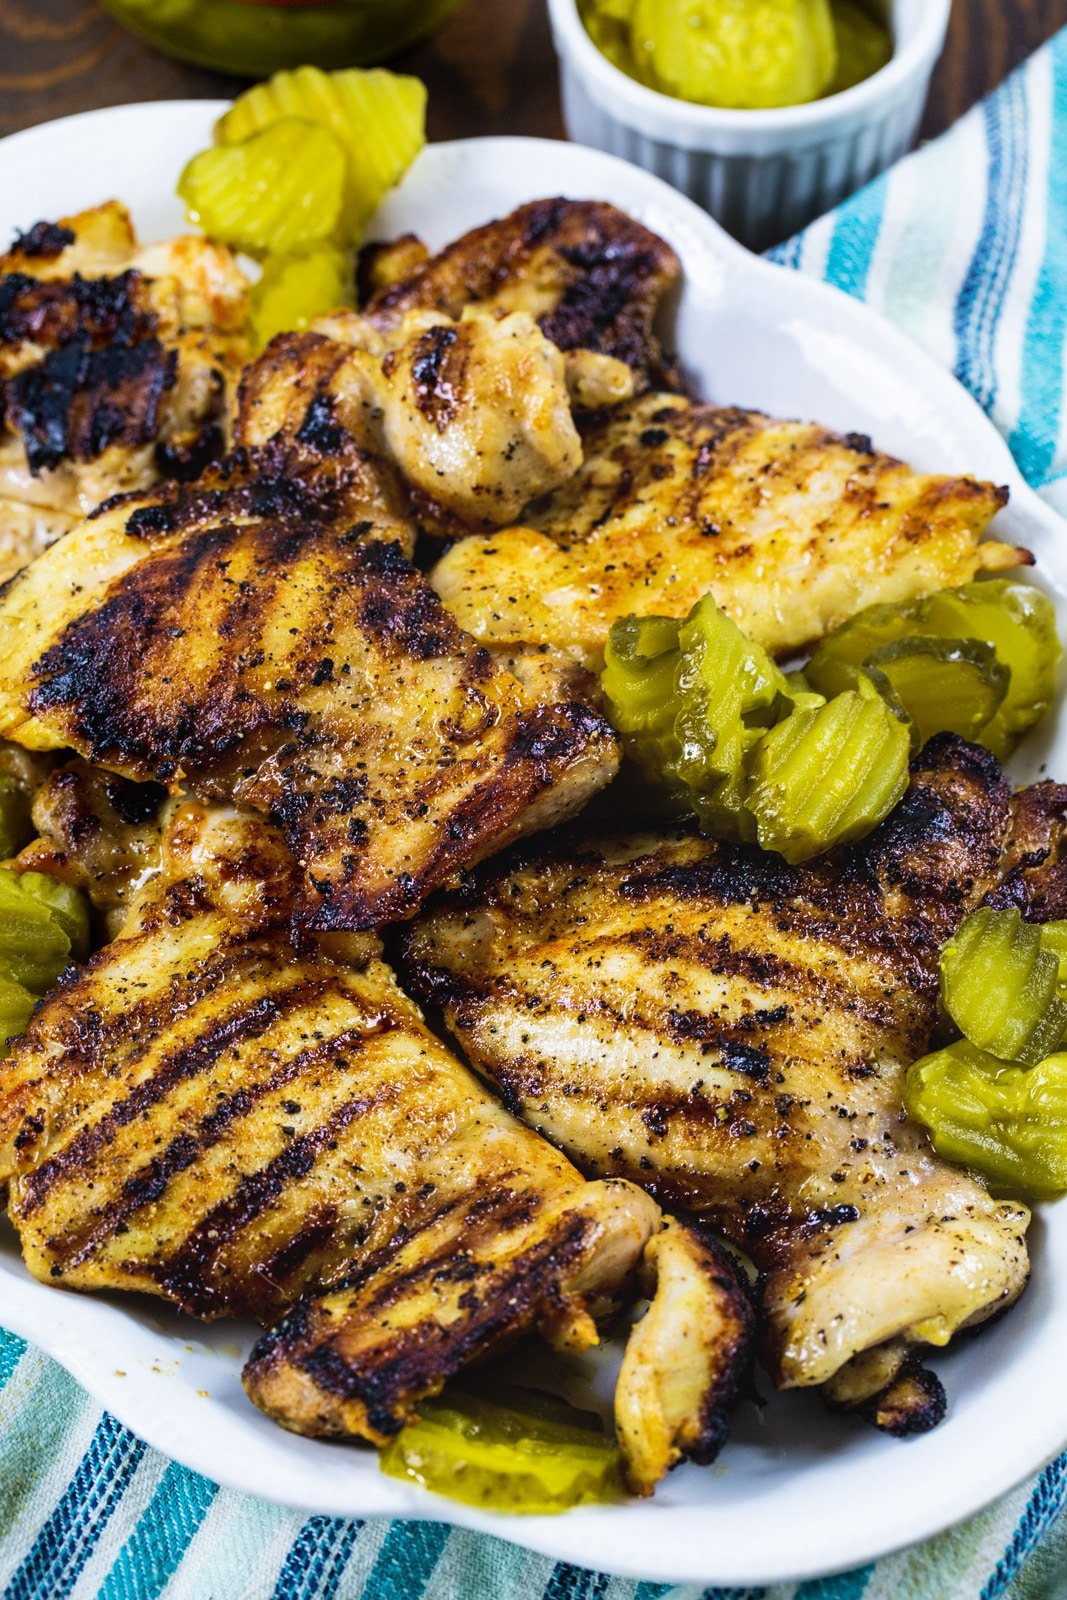 Grilled chicken thighs on serving platter.